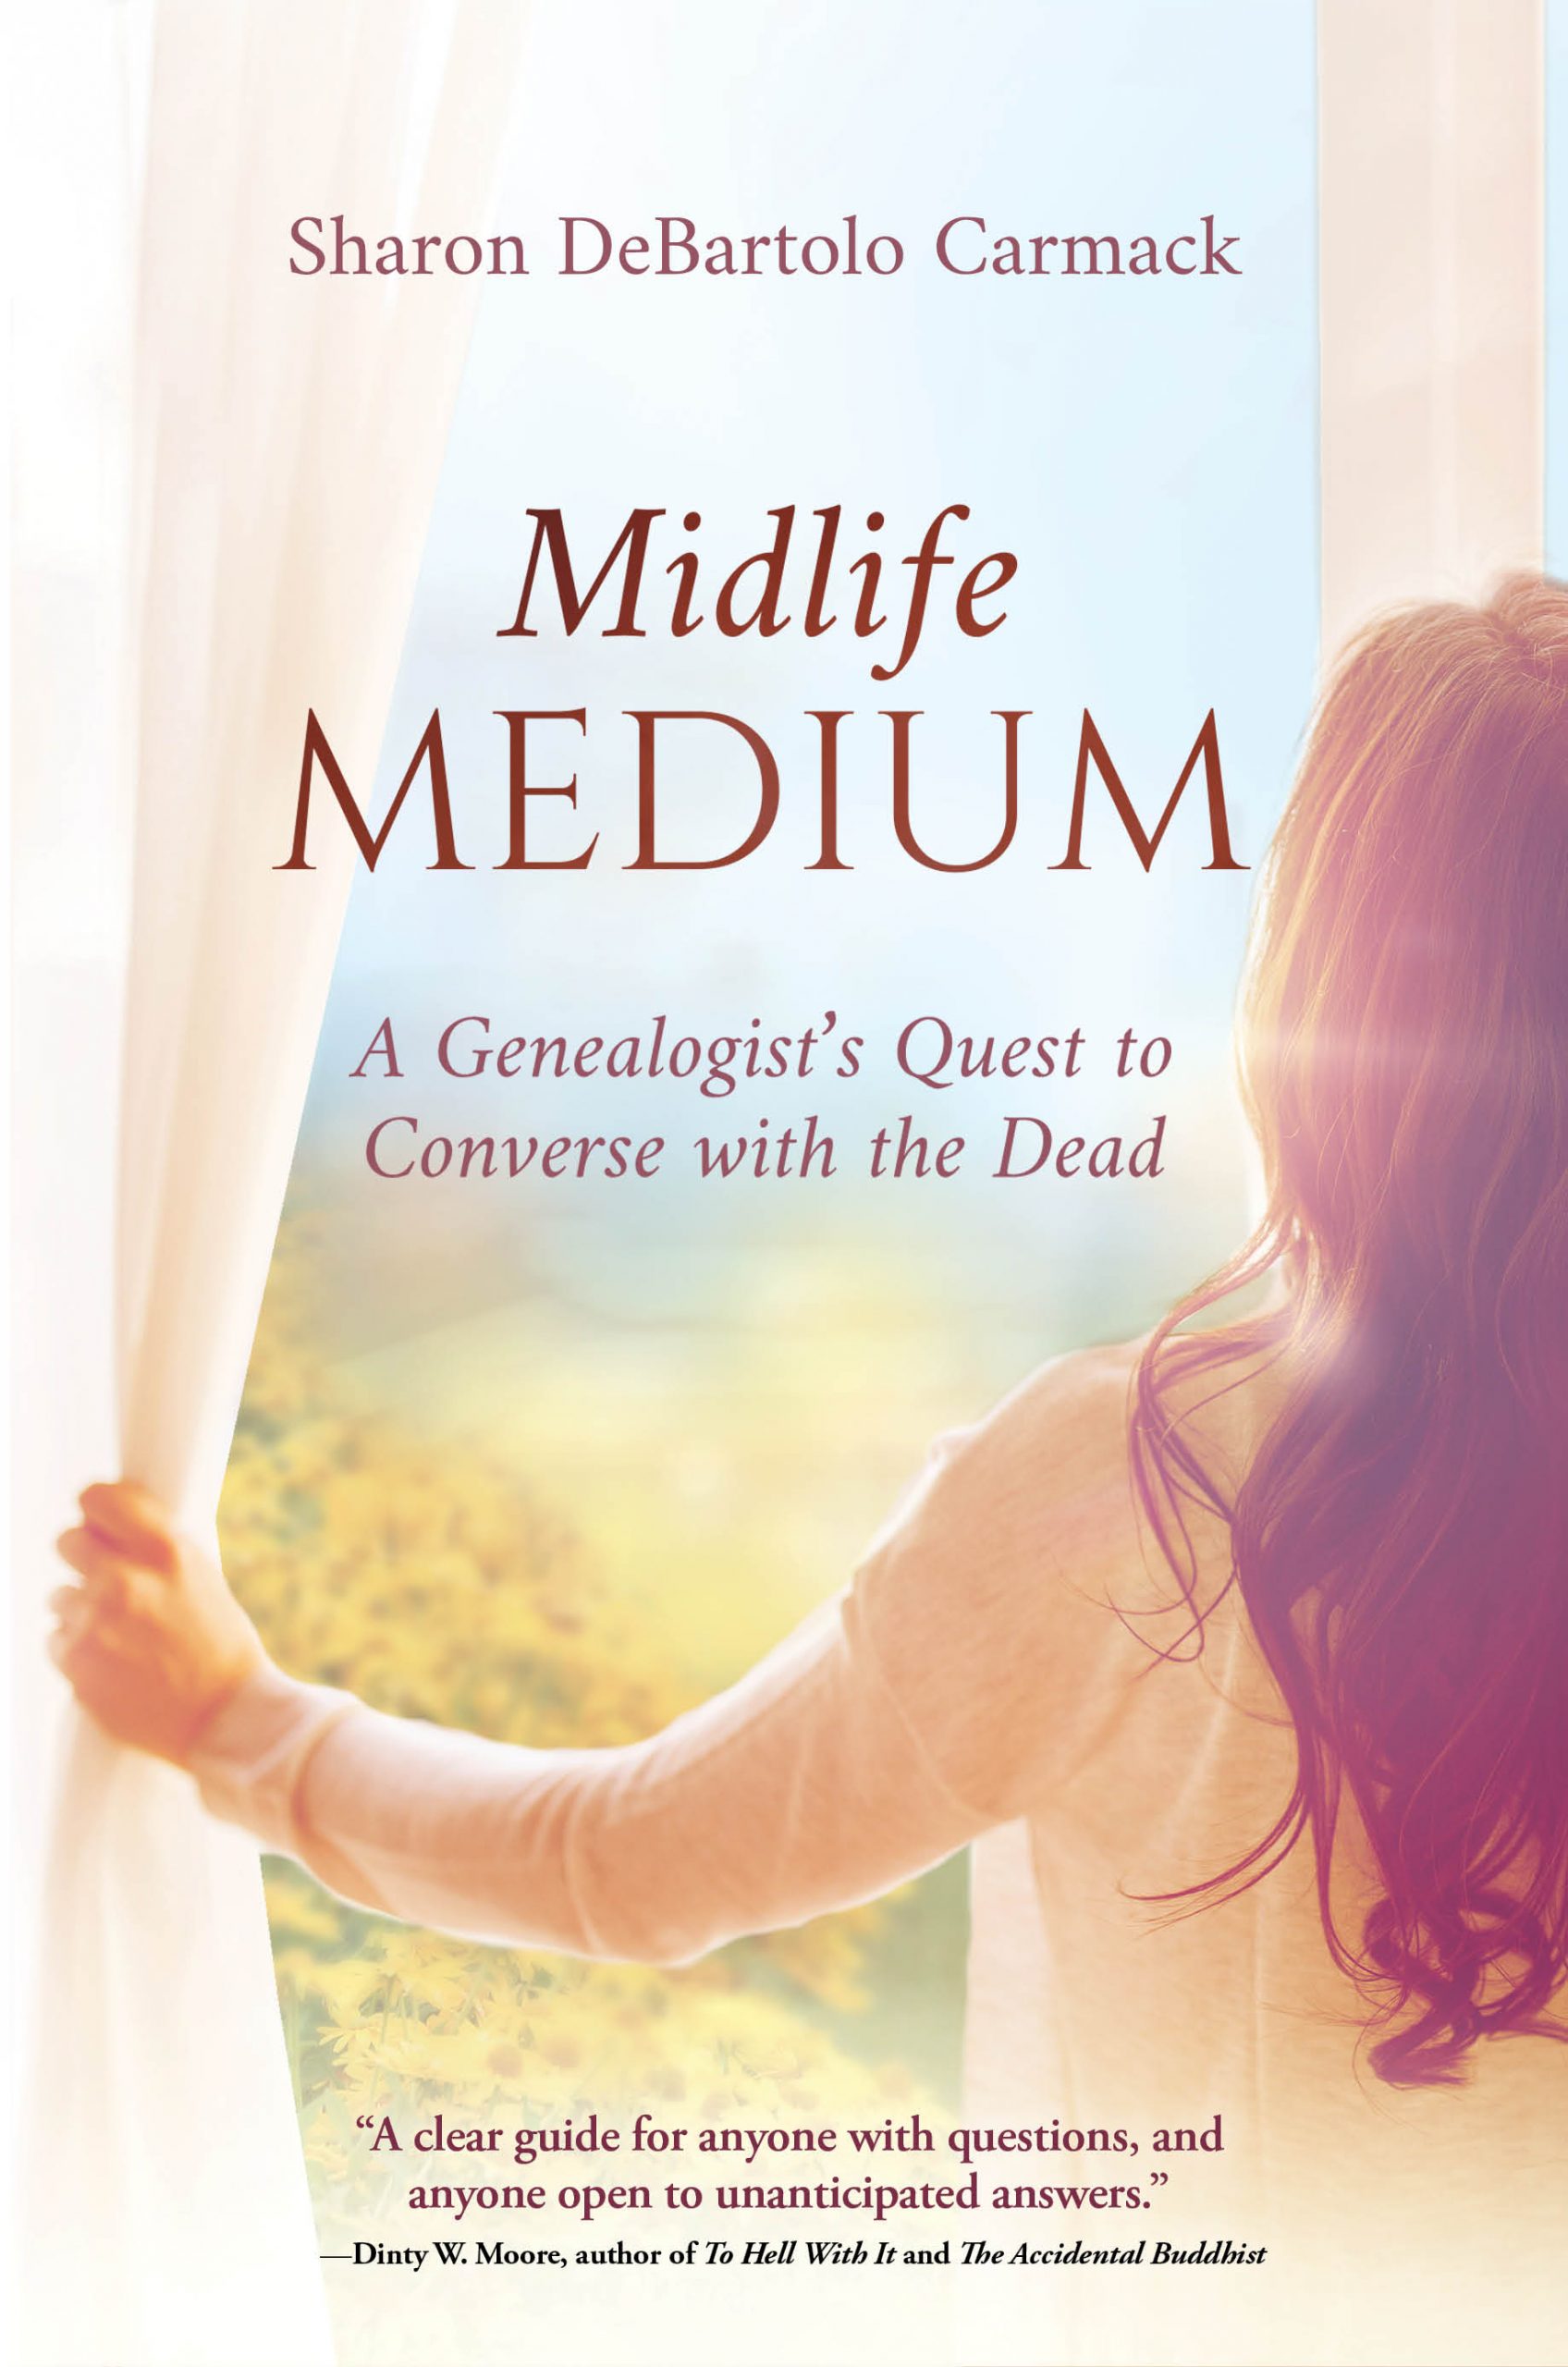 Midlife Medium: A Genealogist’s Quest to Converse with the Dead